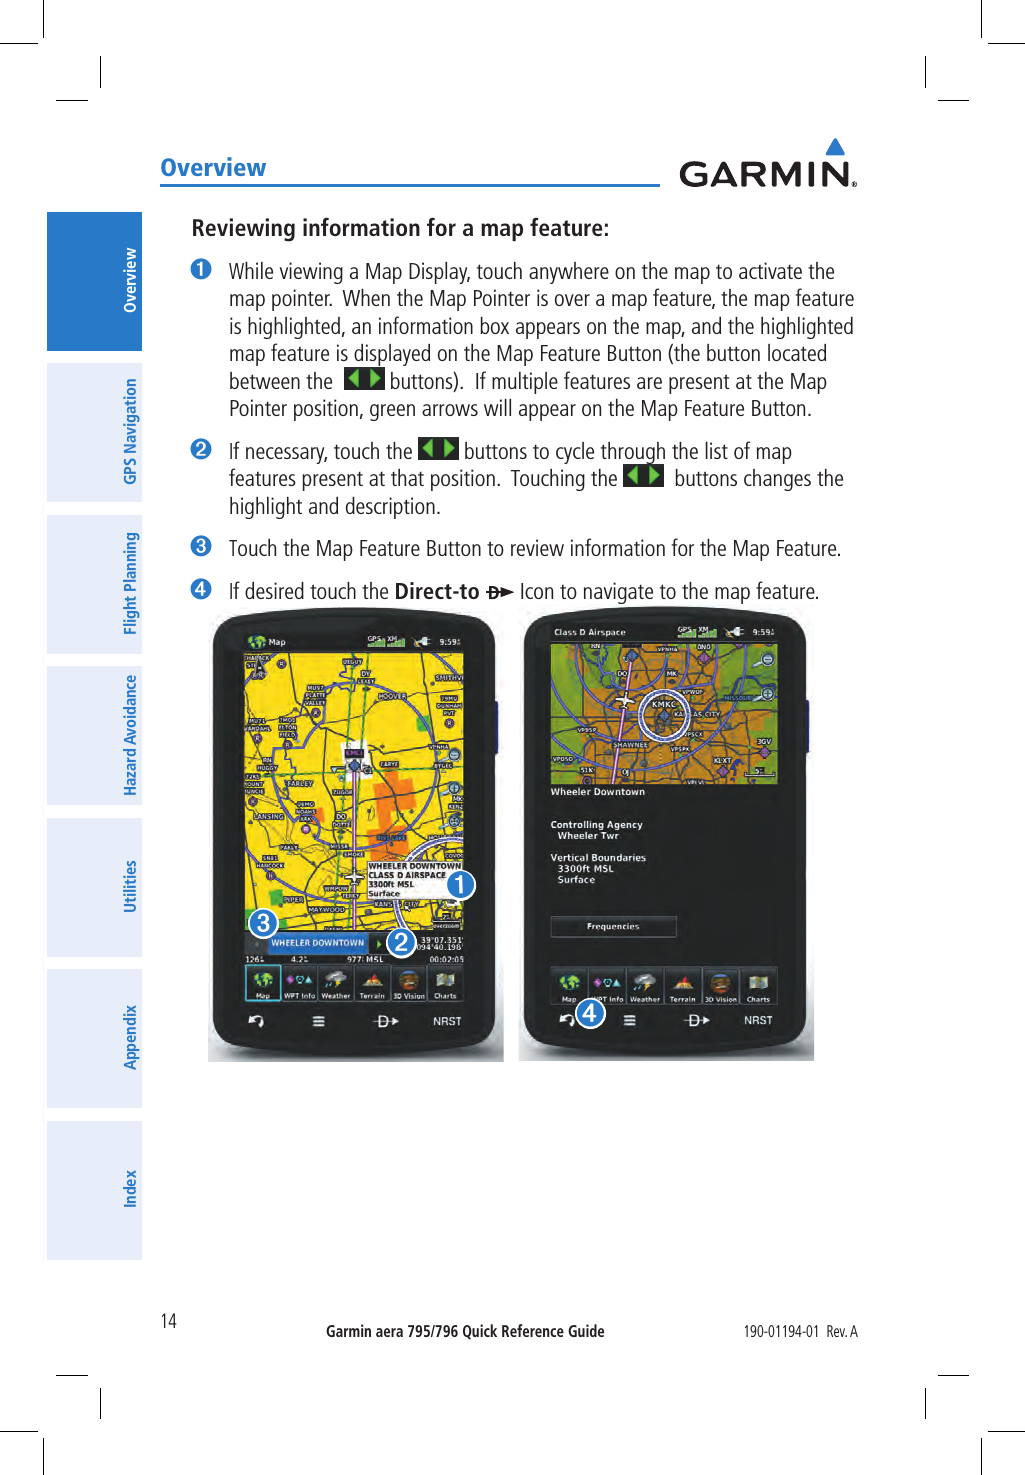 Garmin aera 795/796 Quick Reference Guide190-01194-01  Rev. A14OverviewOverviewGPS NavigationFlight PlanningHazard AvoidanceUtilitiesAppendixIndexReviewing information for a map feature:➊ While viewing a Map Display, touch anywhere on the map to activate the map pointer.  When the Map Pointer is over a map feature, the map feature is highlighted, an information box appears on the map, and the highlighted map feature is displayed on the Map Feature Button (the button located between the    buttons).  If multiple features are present at the Map Pointer position, green arrows will appear on the Map Feature Button.➋ If necessary, touch the   buttons to cycle through the list of map features present at that position.  Touching the    buttons changes the highlight and description.➌ Touch the Map Feature Button to review information for the Map Feature.➍ If desired touch the Direct-to   Icon to navigate to the map feature.➊➋➌➍